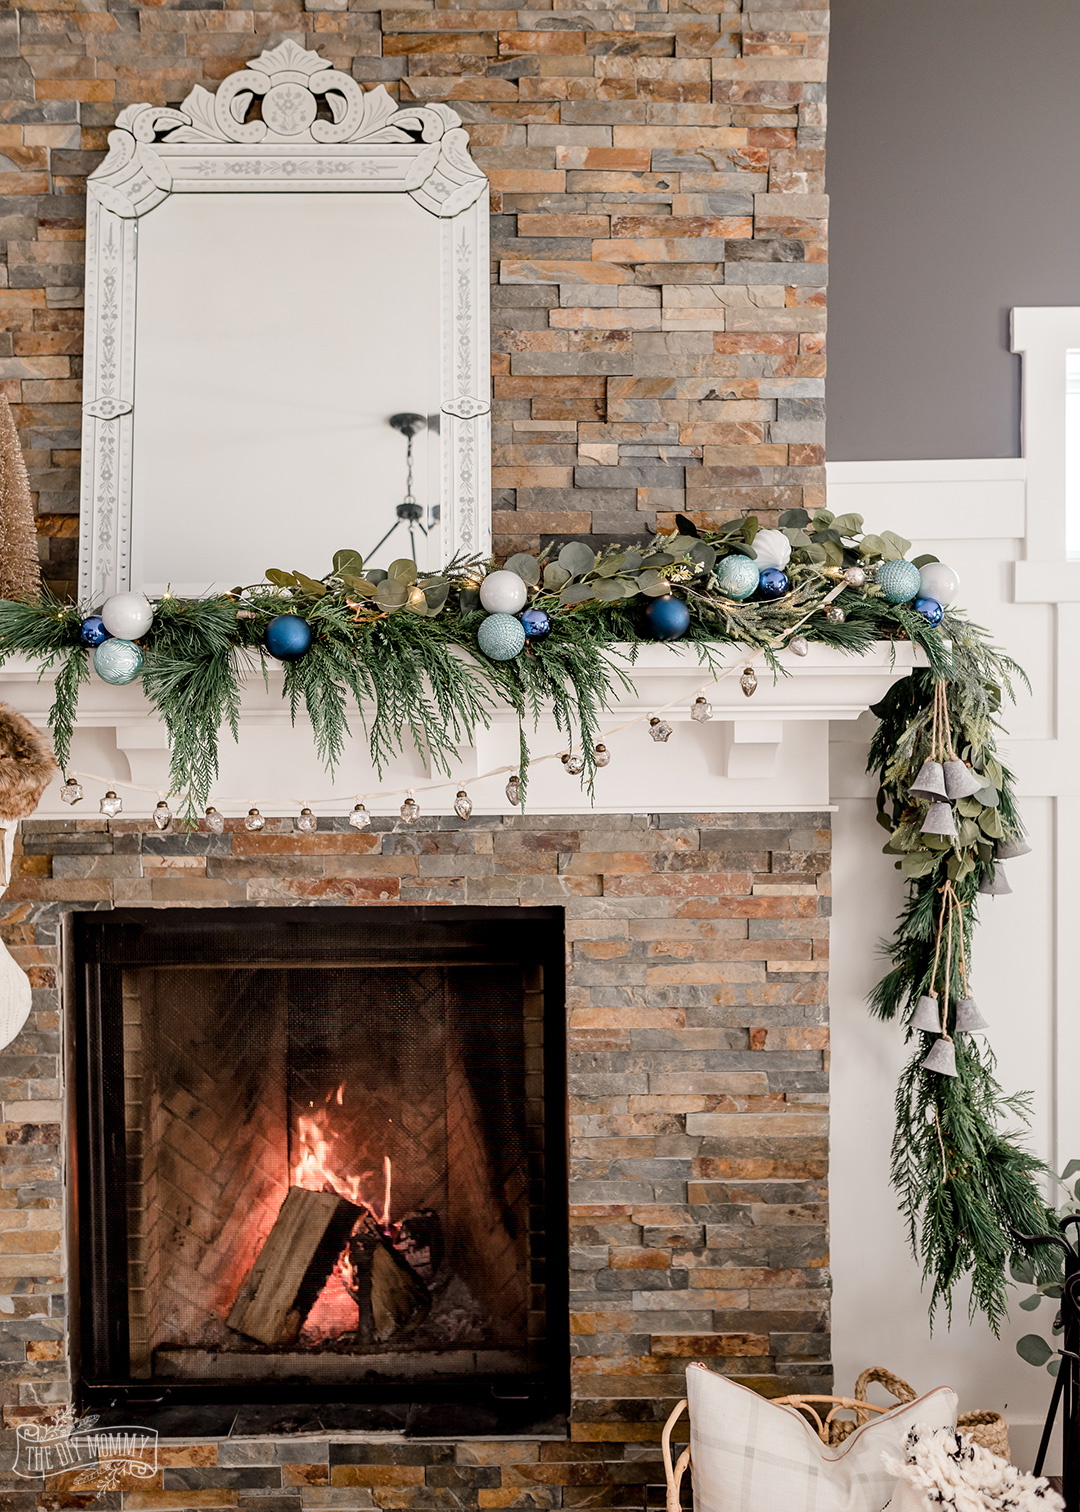 Christmas mantel with asymmetrical fresh greenery, blue colors, metallics, bottle brush trees and knit stockings.